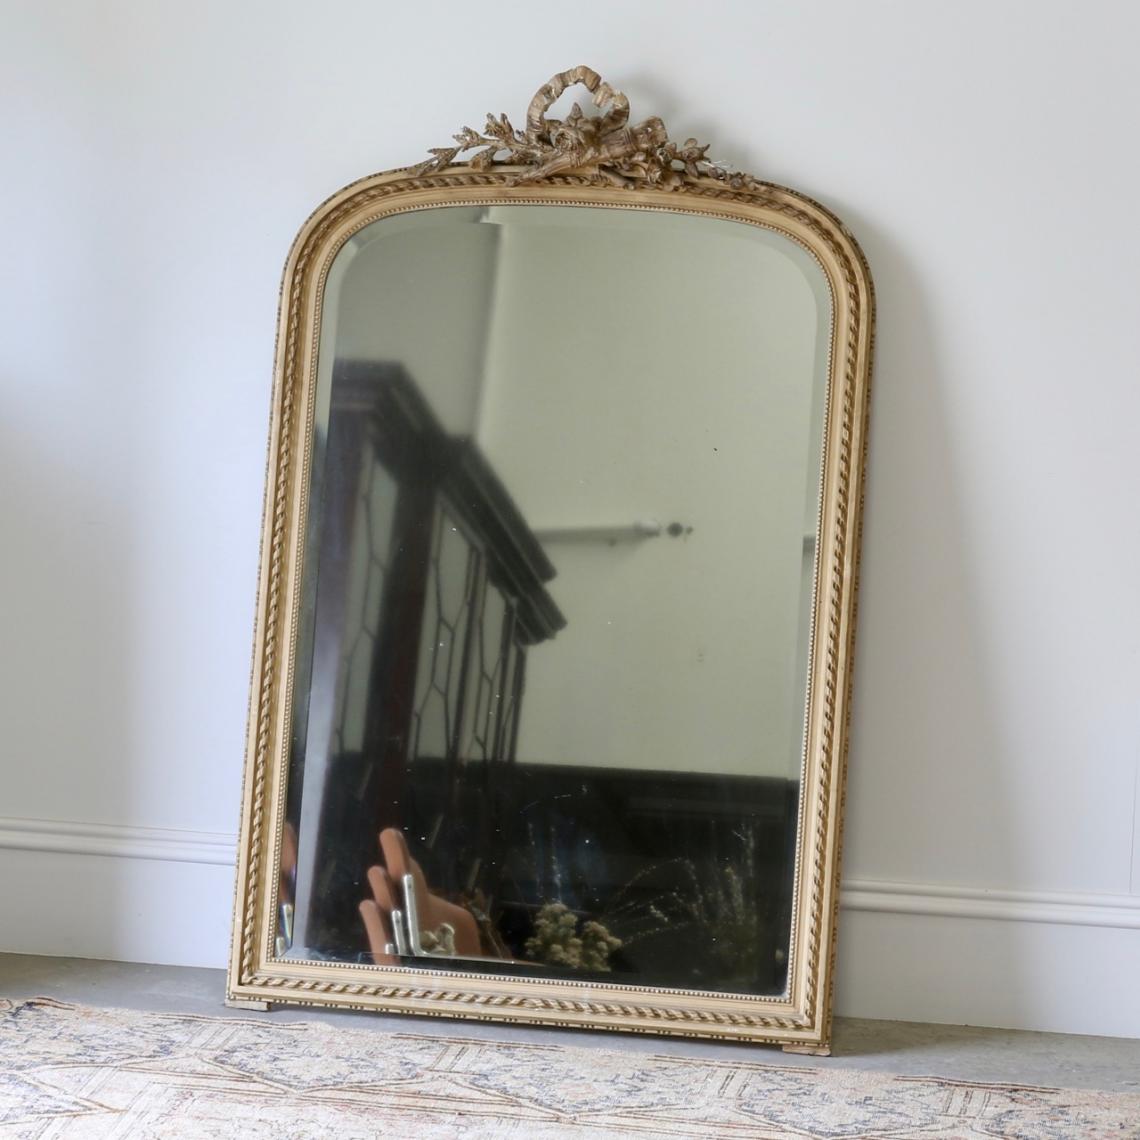 John Stephens & Company  Louis Philippe Mirror with Crest (Stock Number  132-68)